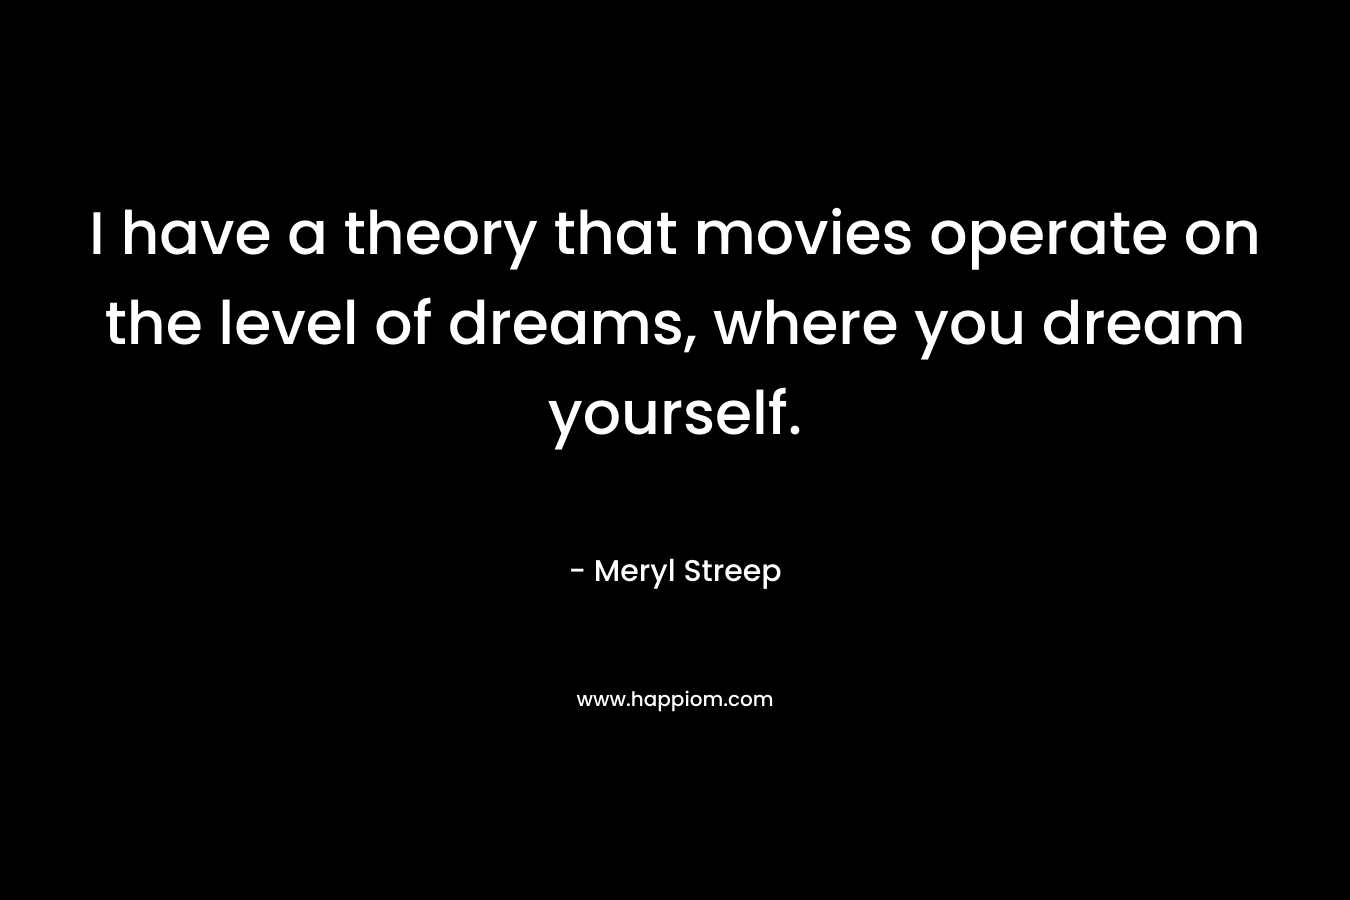 I have a theory that movies operate on the level of dreams, where you dream yourself. – Meryl Streep